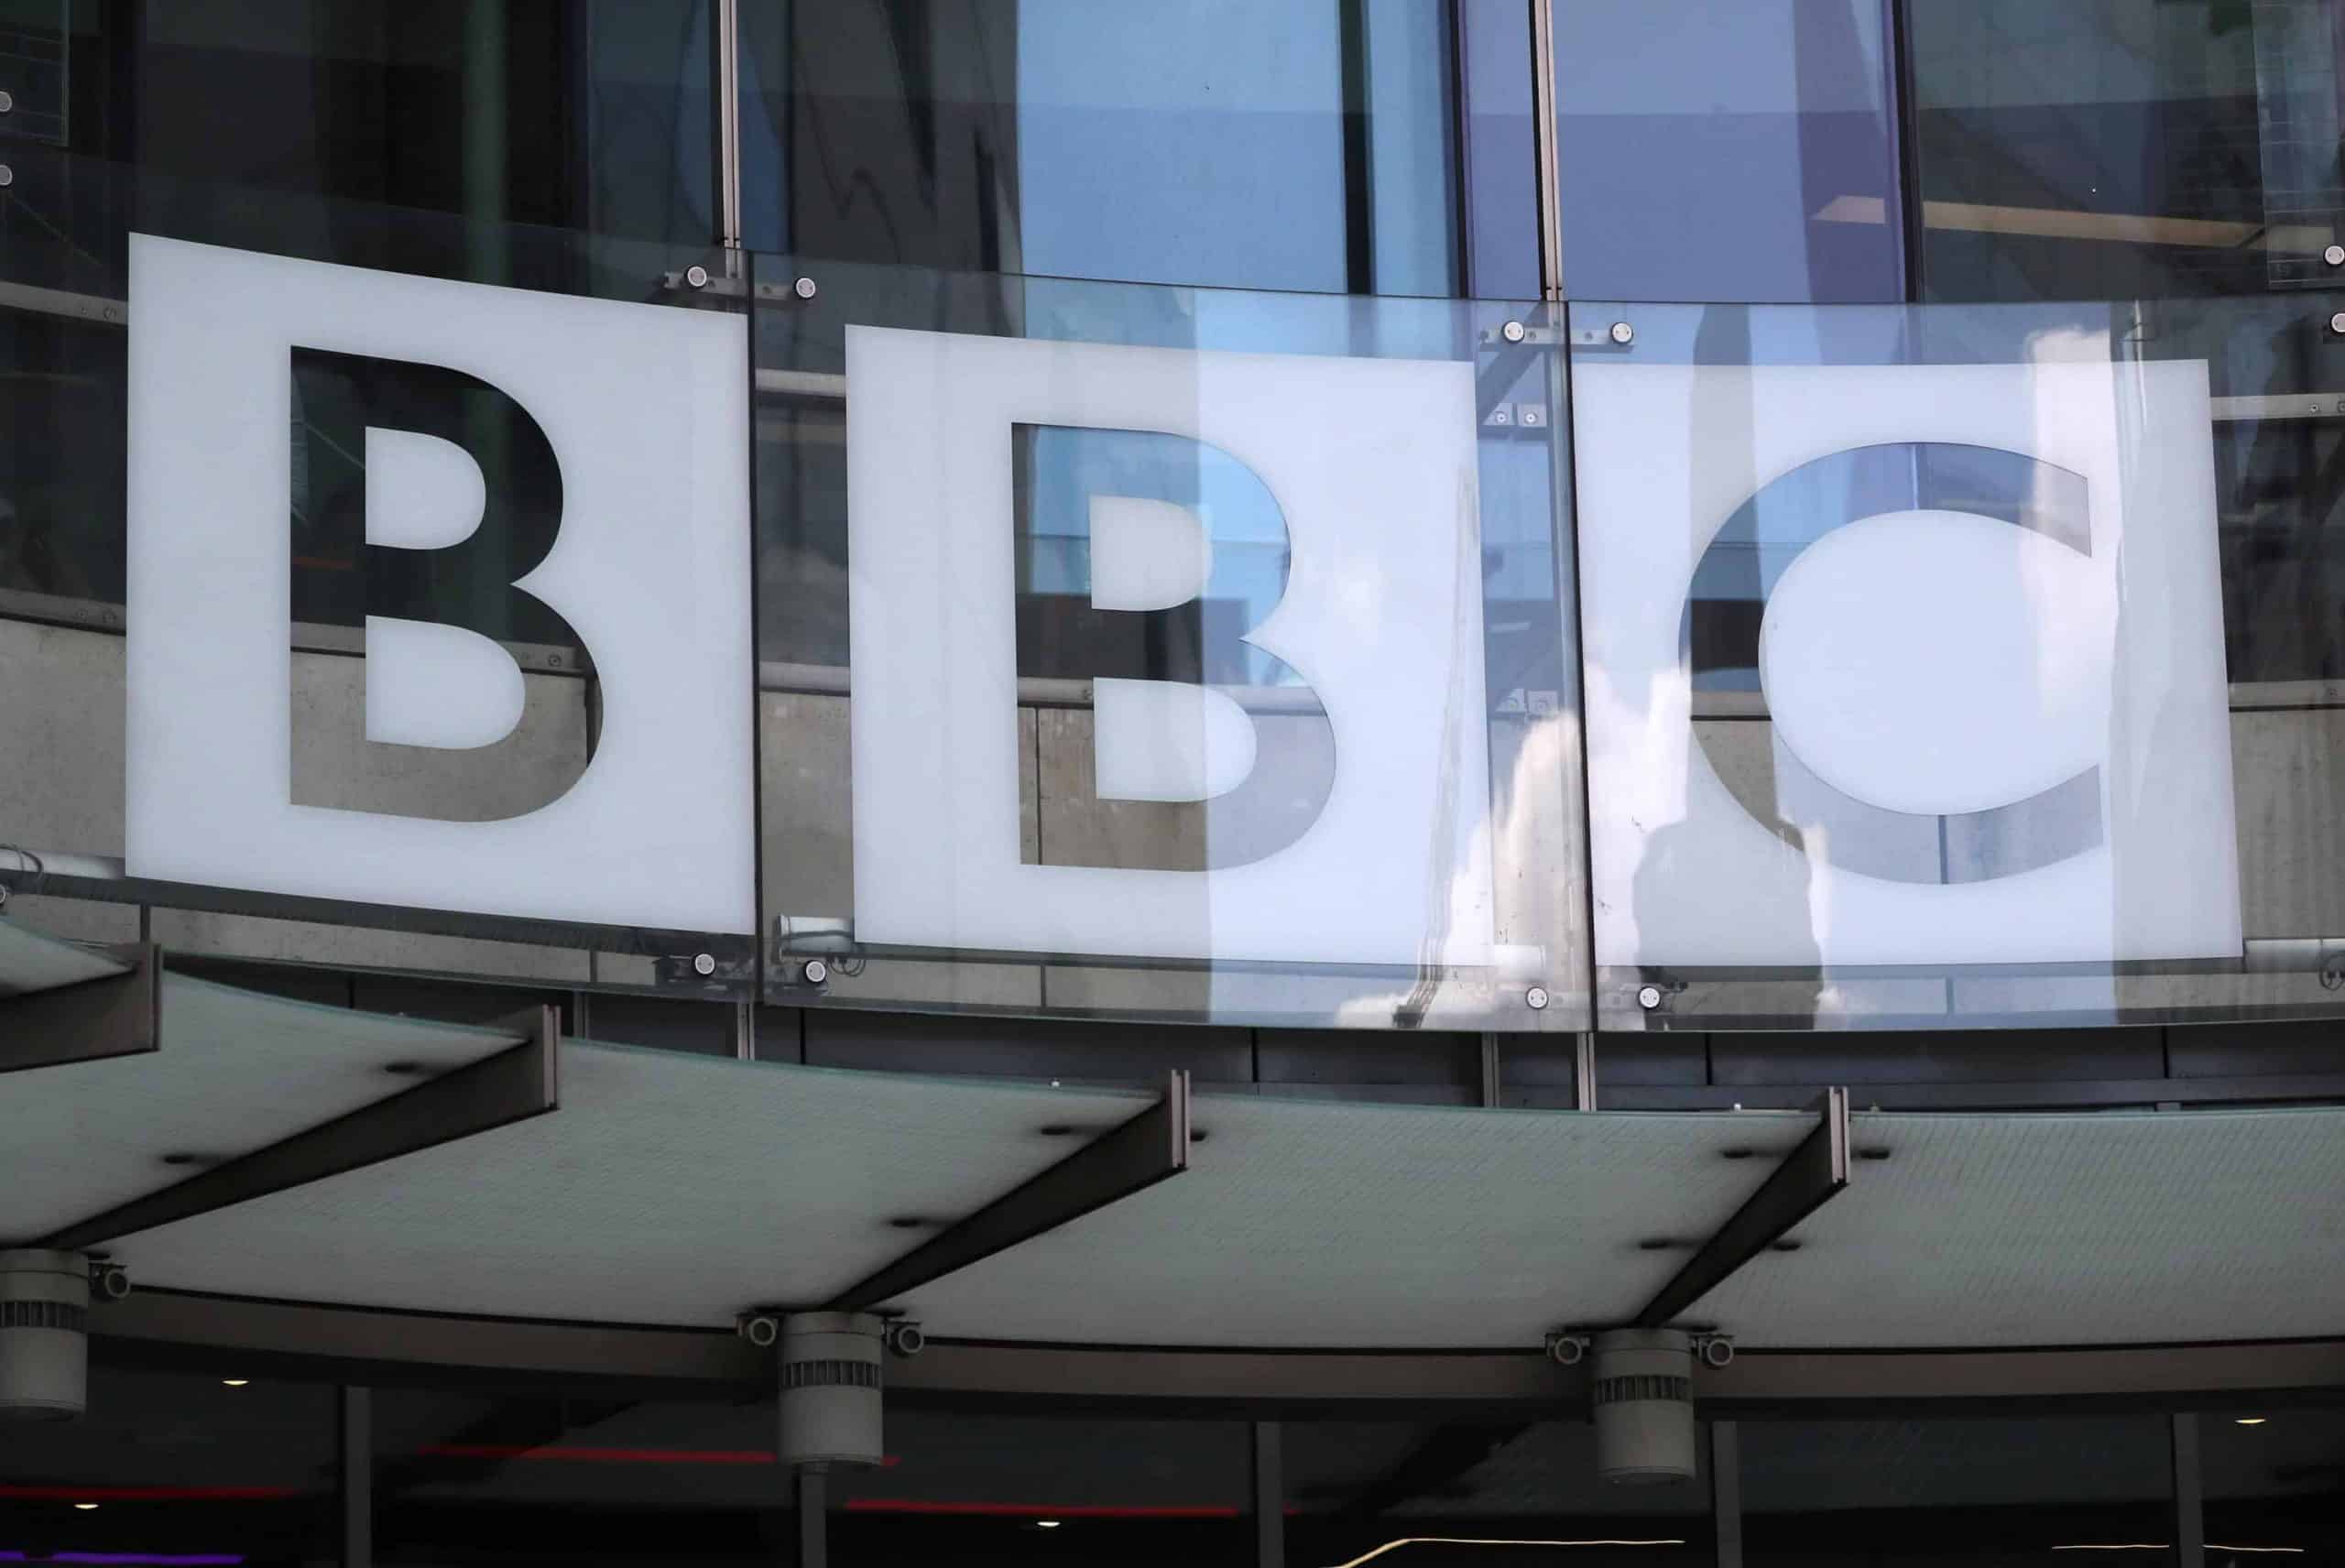 Ministers say they will intervene ‘to restore BBC trust’